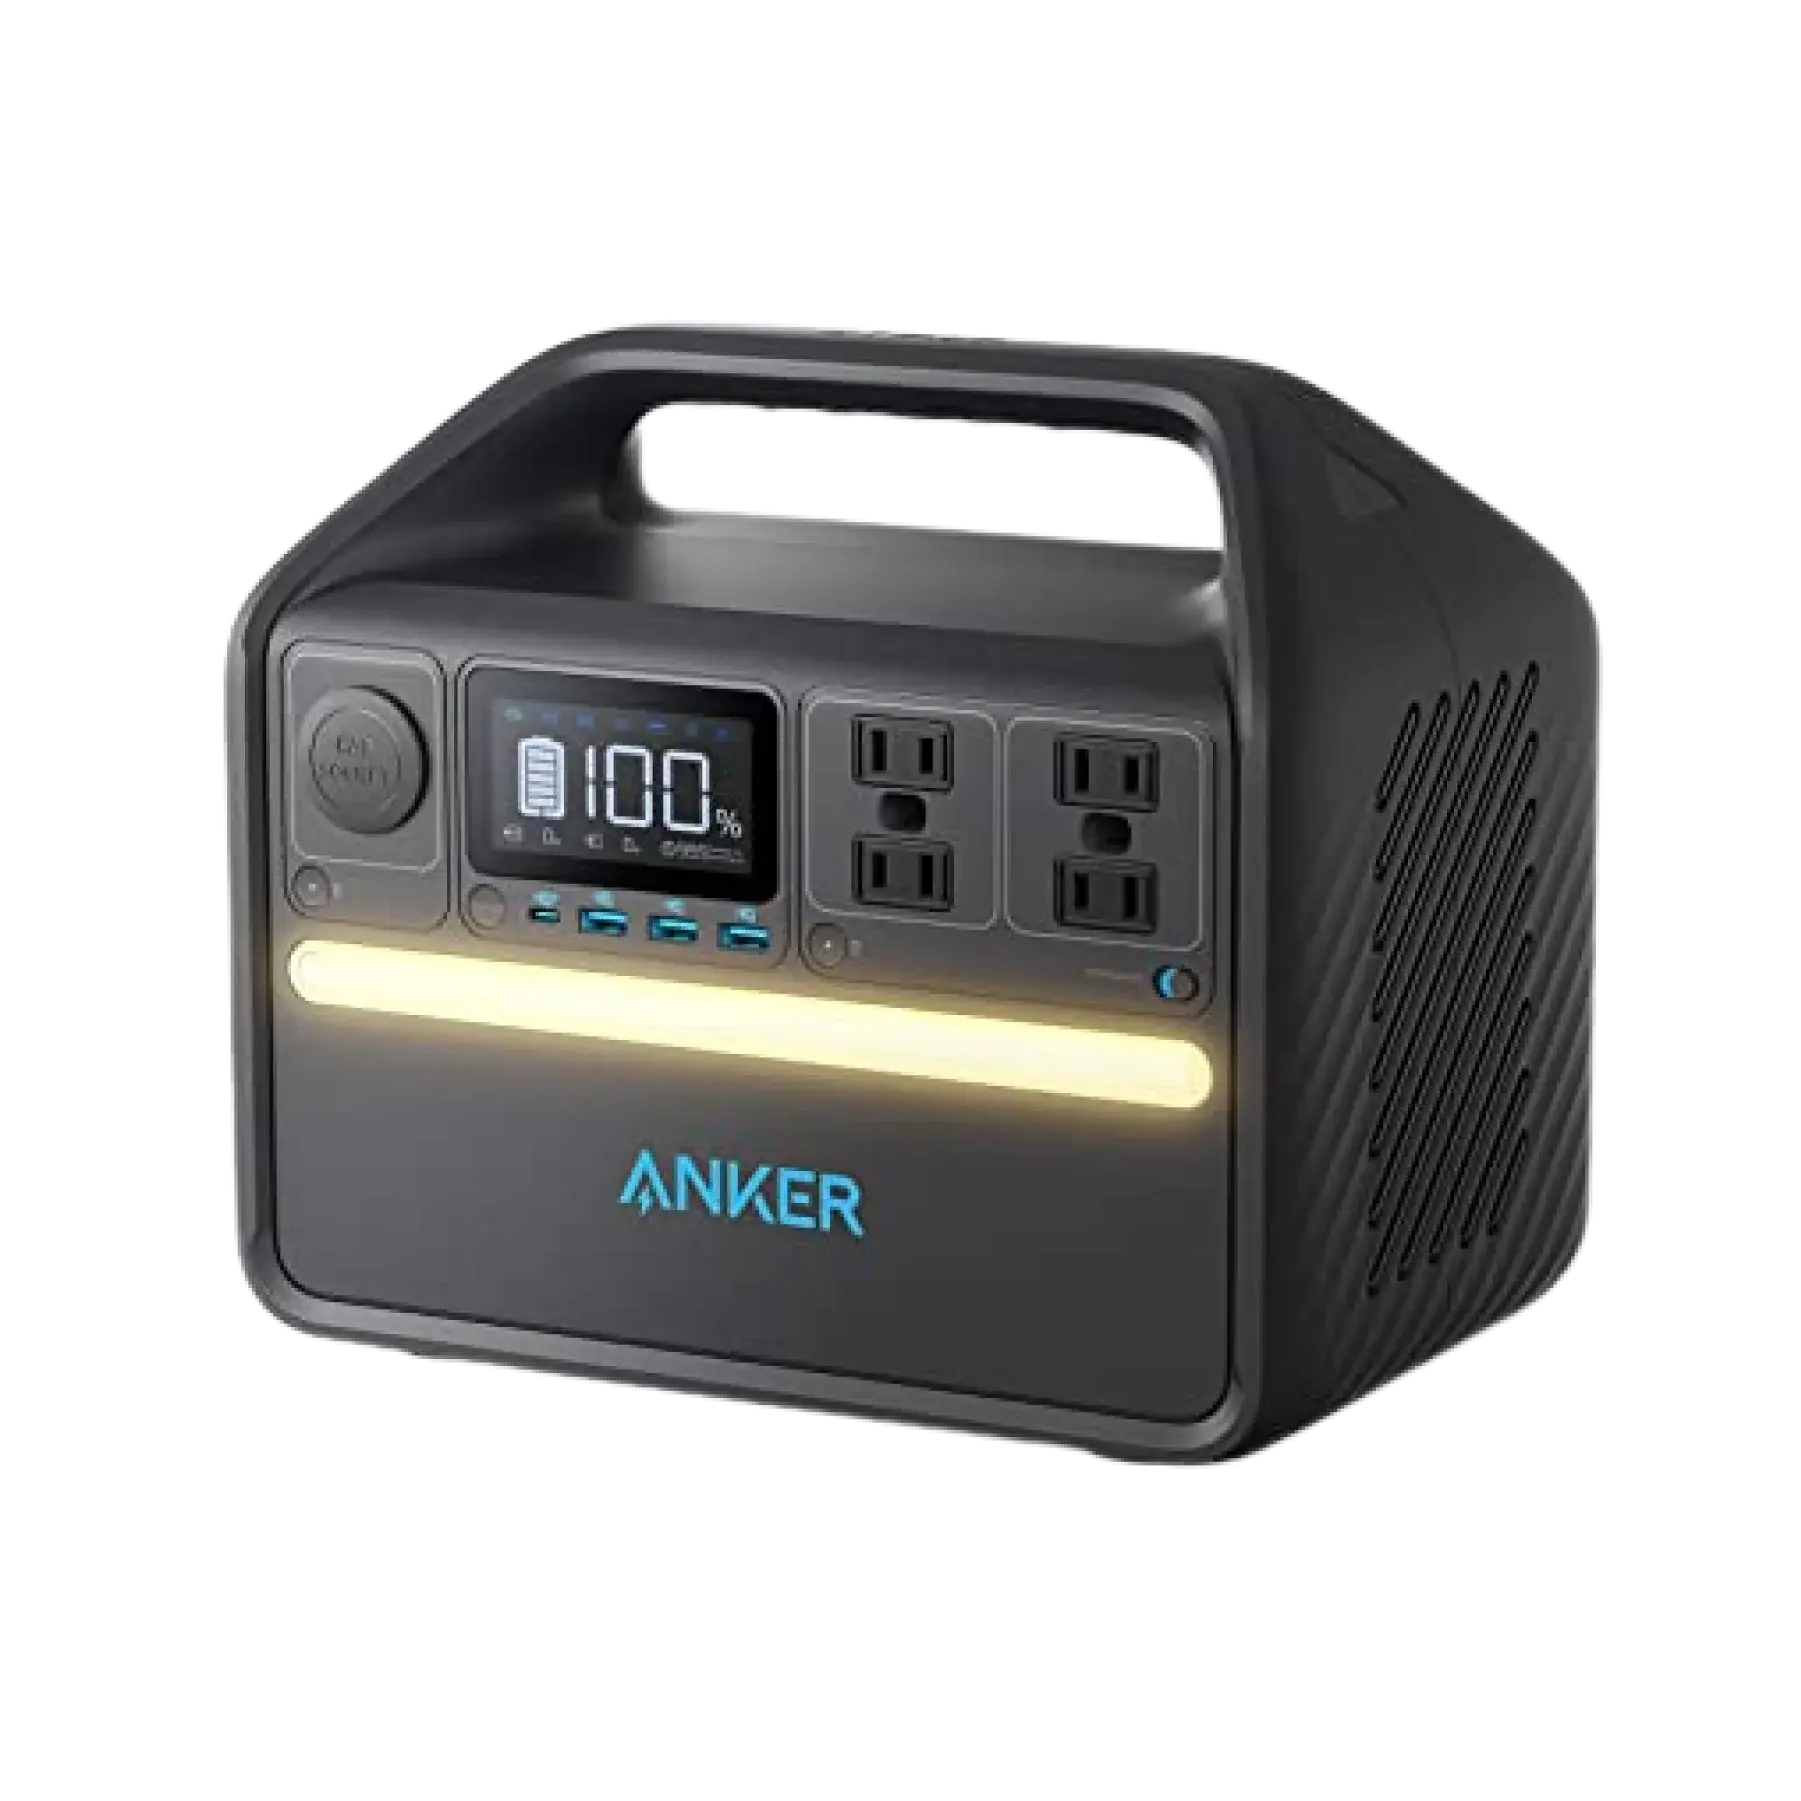 Anker PowerHouse 535 portable power station with 512Wh capacity and 500W output4